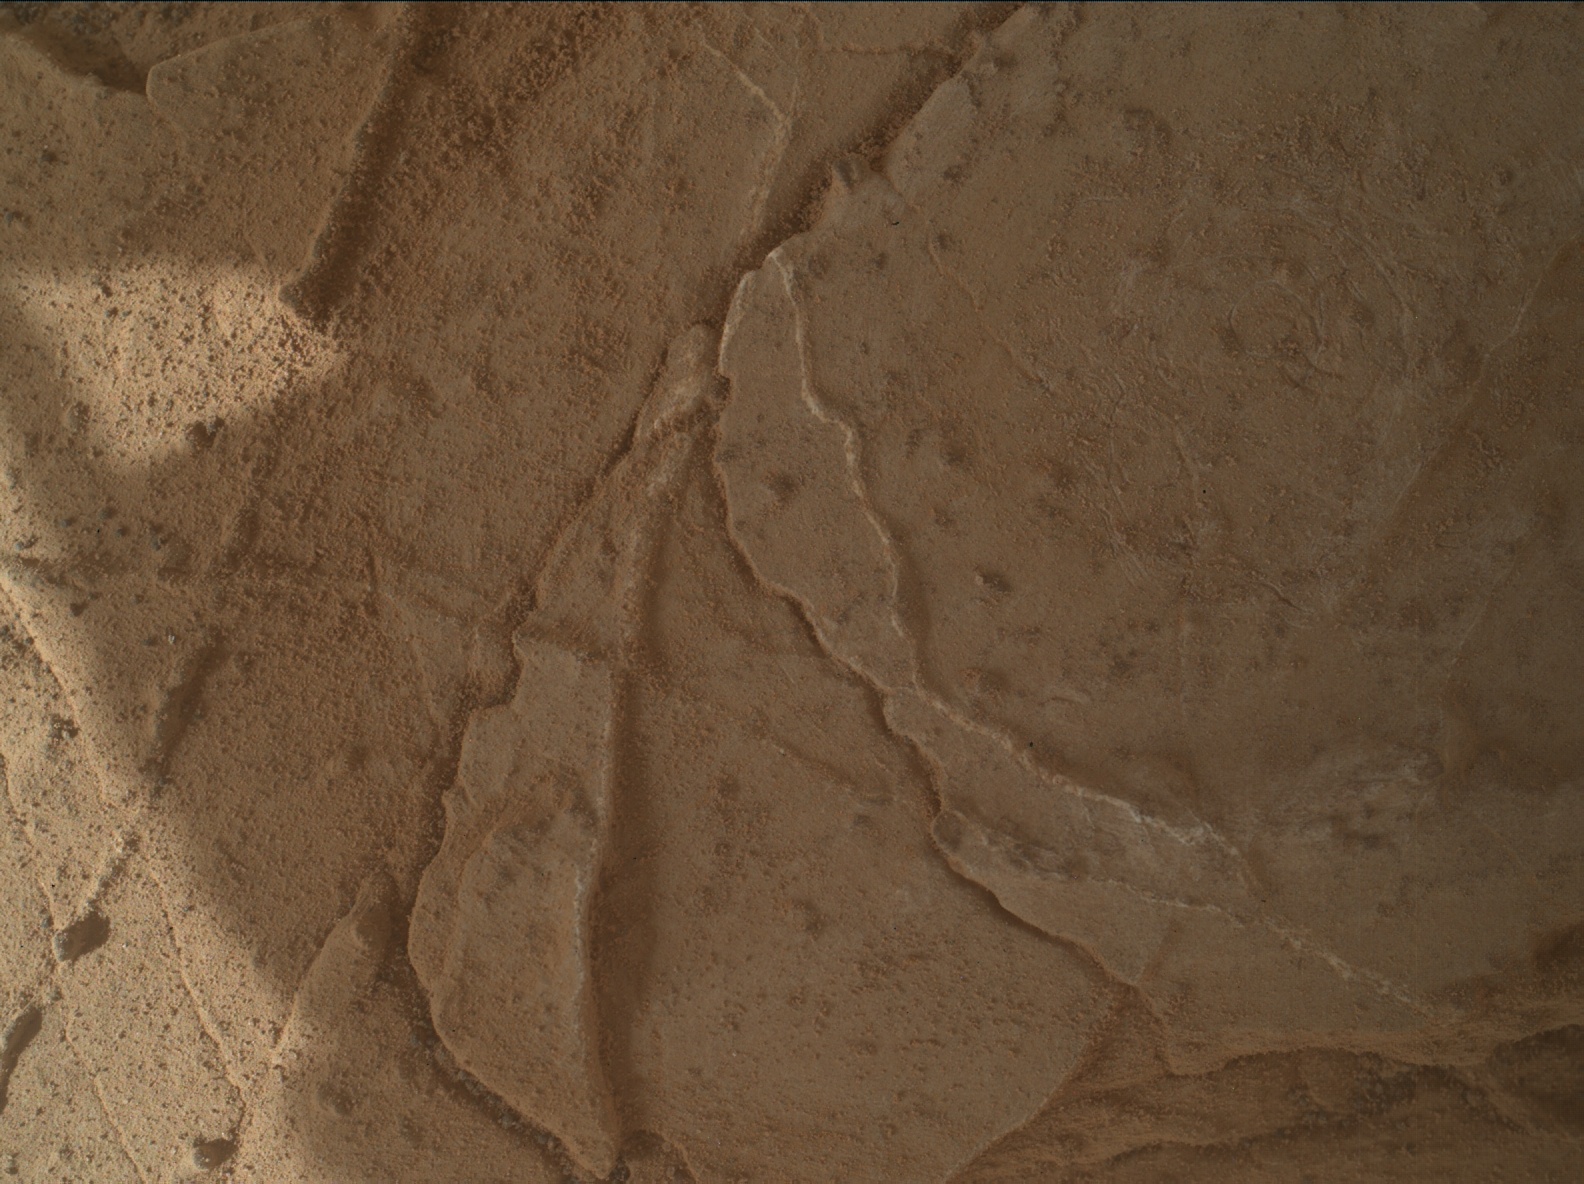 Nasa's Mars rover Curiosity acquired this image using its Mars Hand Lens Imager (MAHLI) on Sol 3054